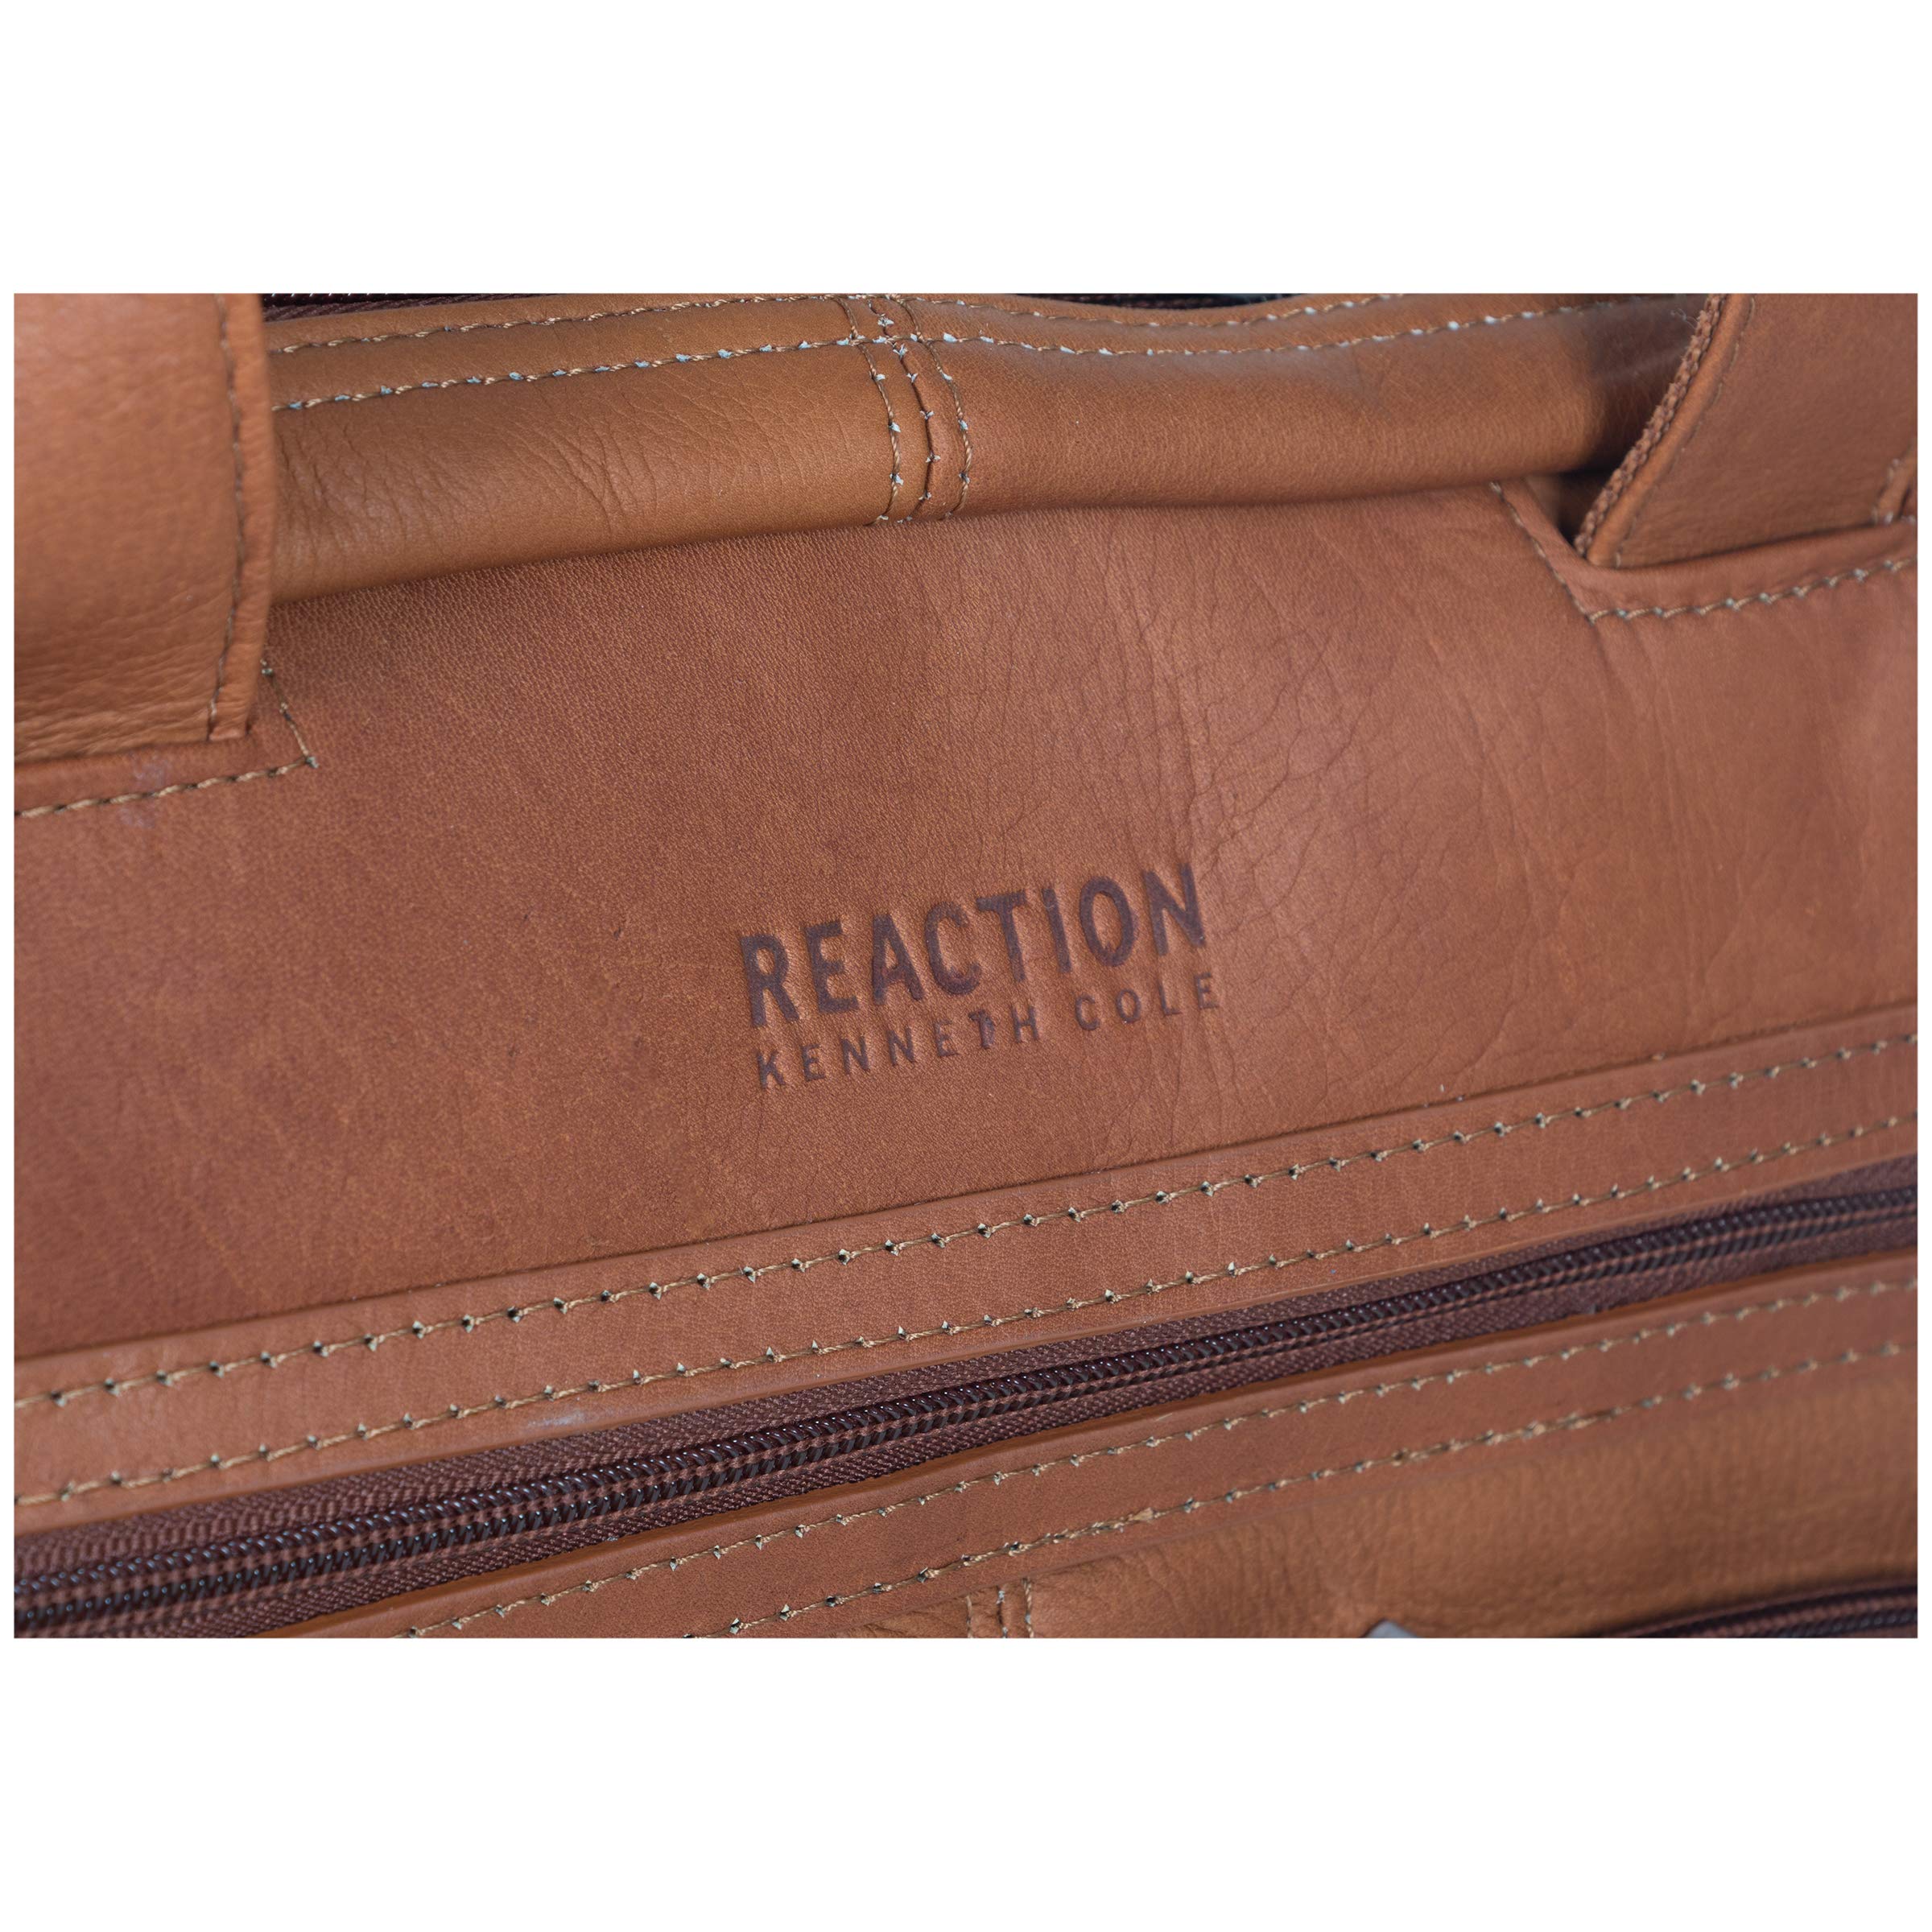 Kenneth Cole Reaction Manhattan Colombian Leather Briefcase Expandable RFID 15.6